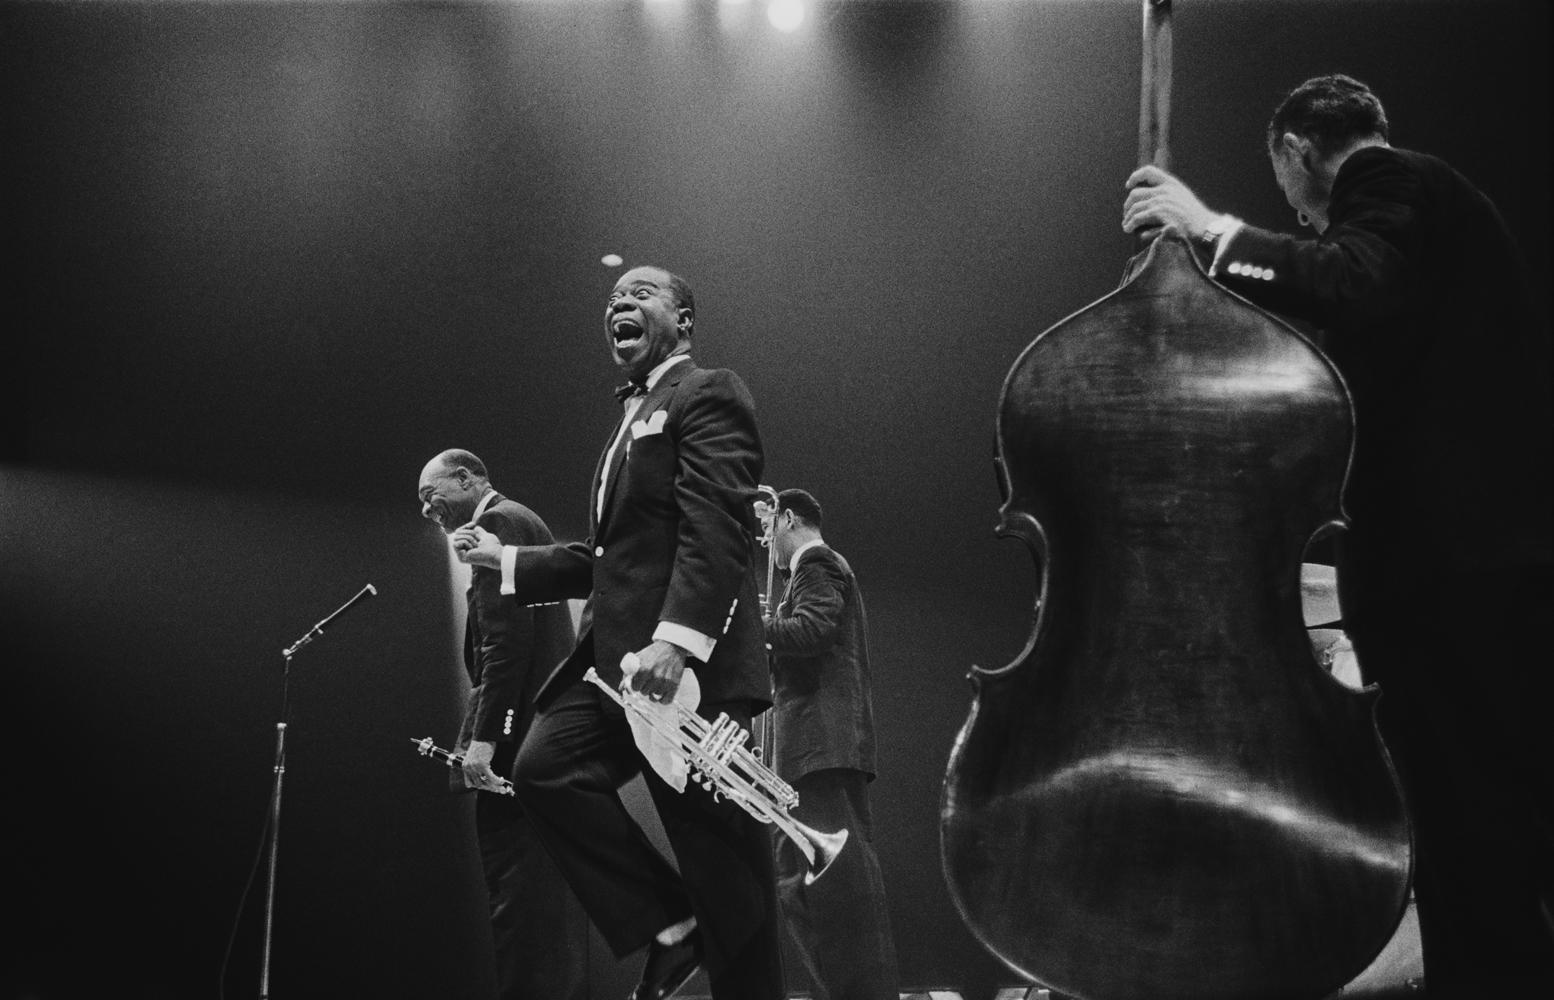 Haywood Magee Black and White Photograph - Louis Armstrong On Stage - Giant Oversize Limited Edition Silver Gelatin Print 